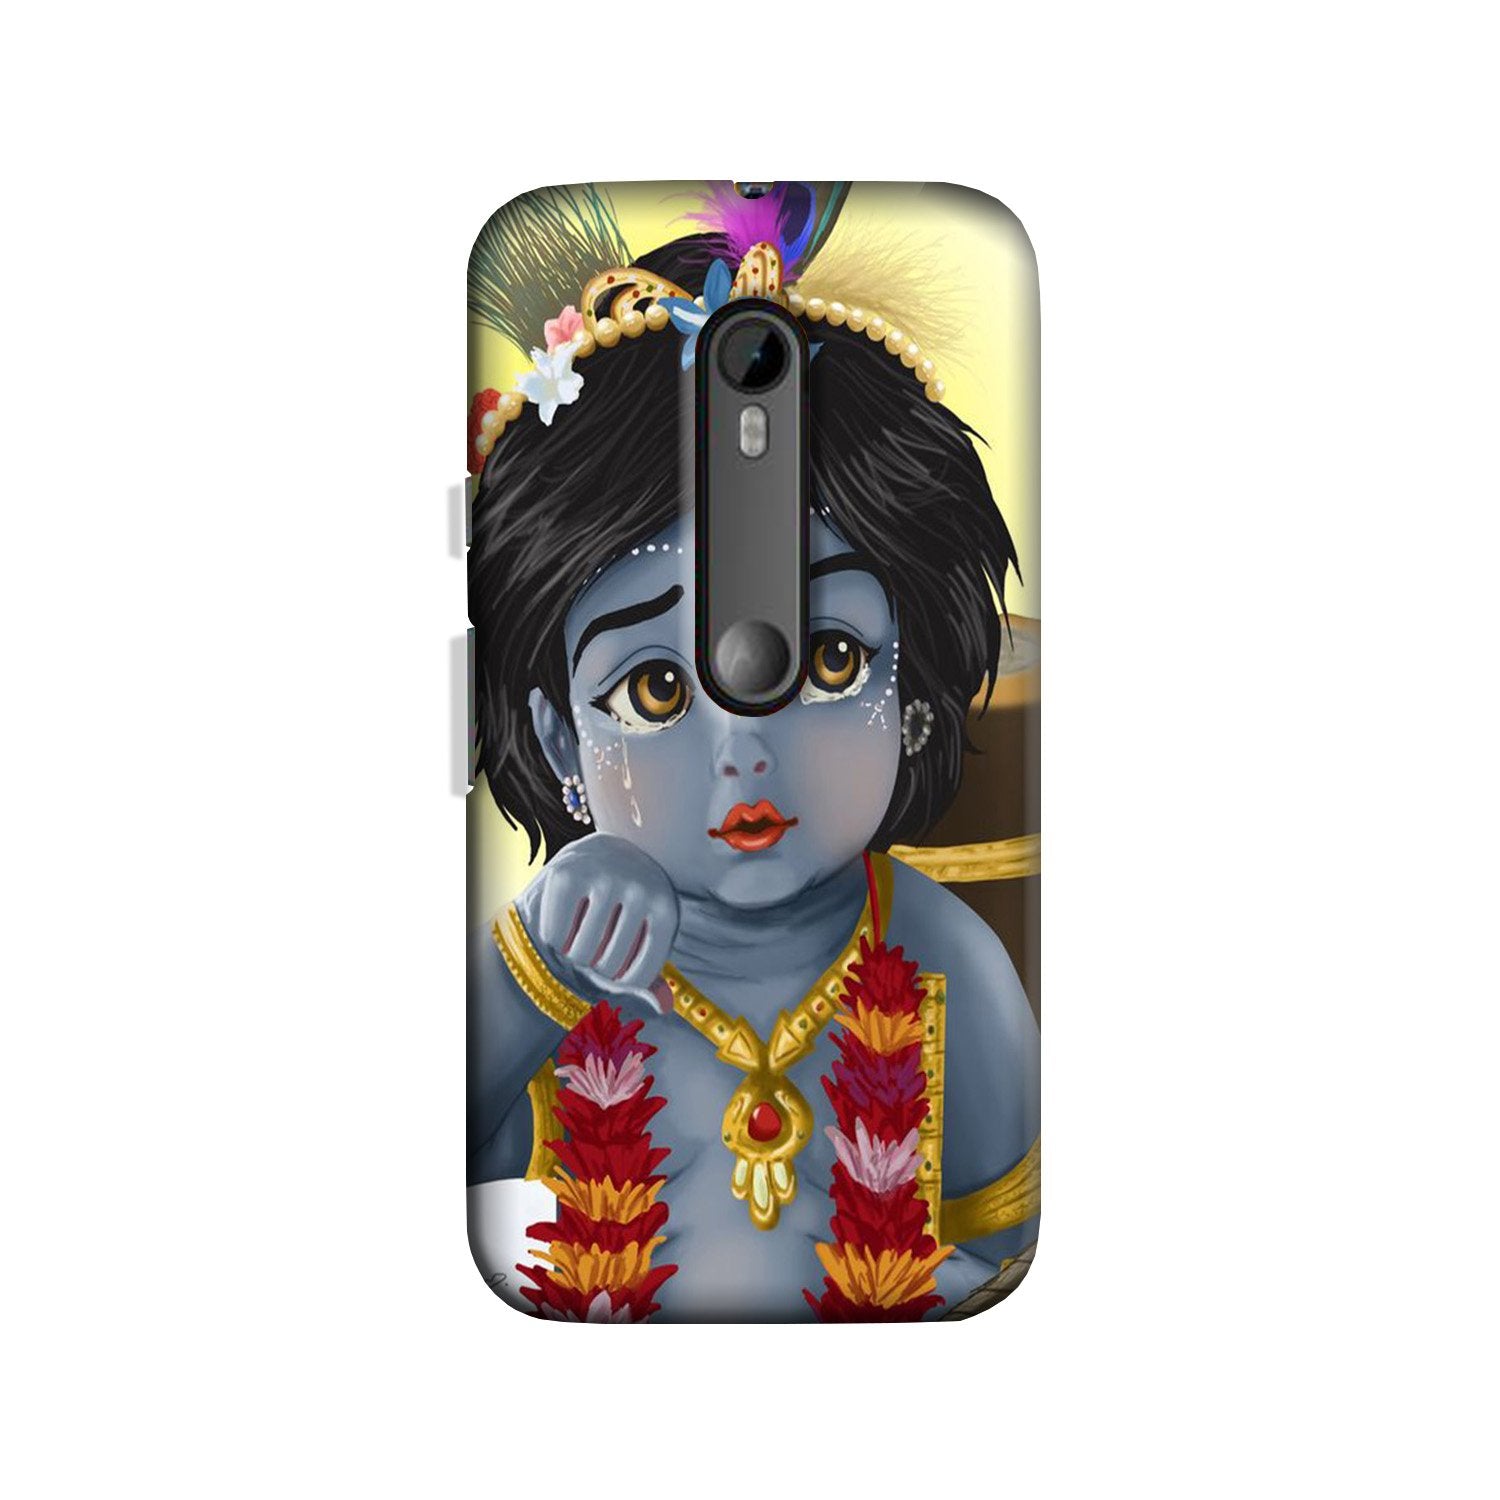 Bal Gopal Case for Moto X Style